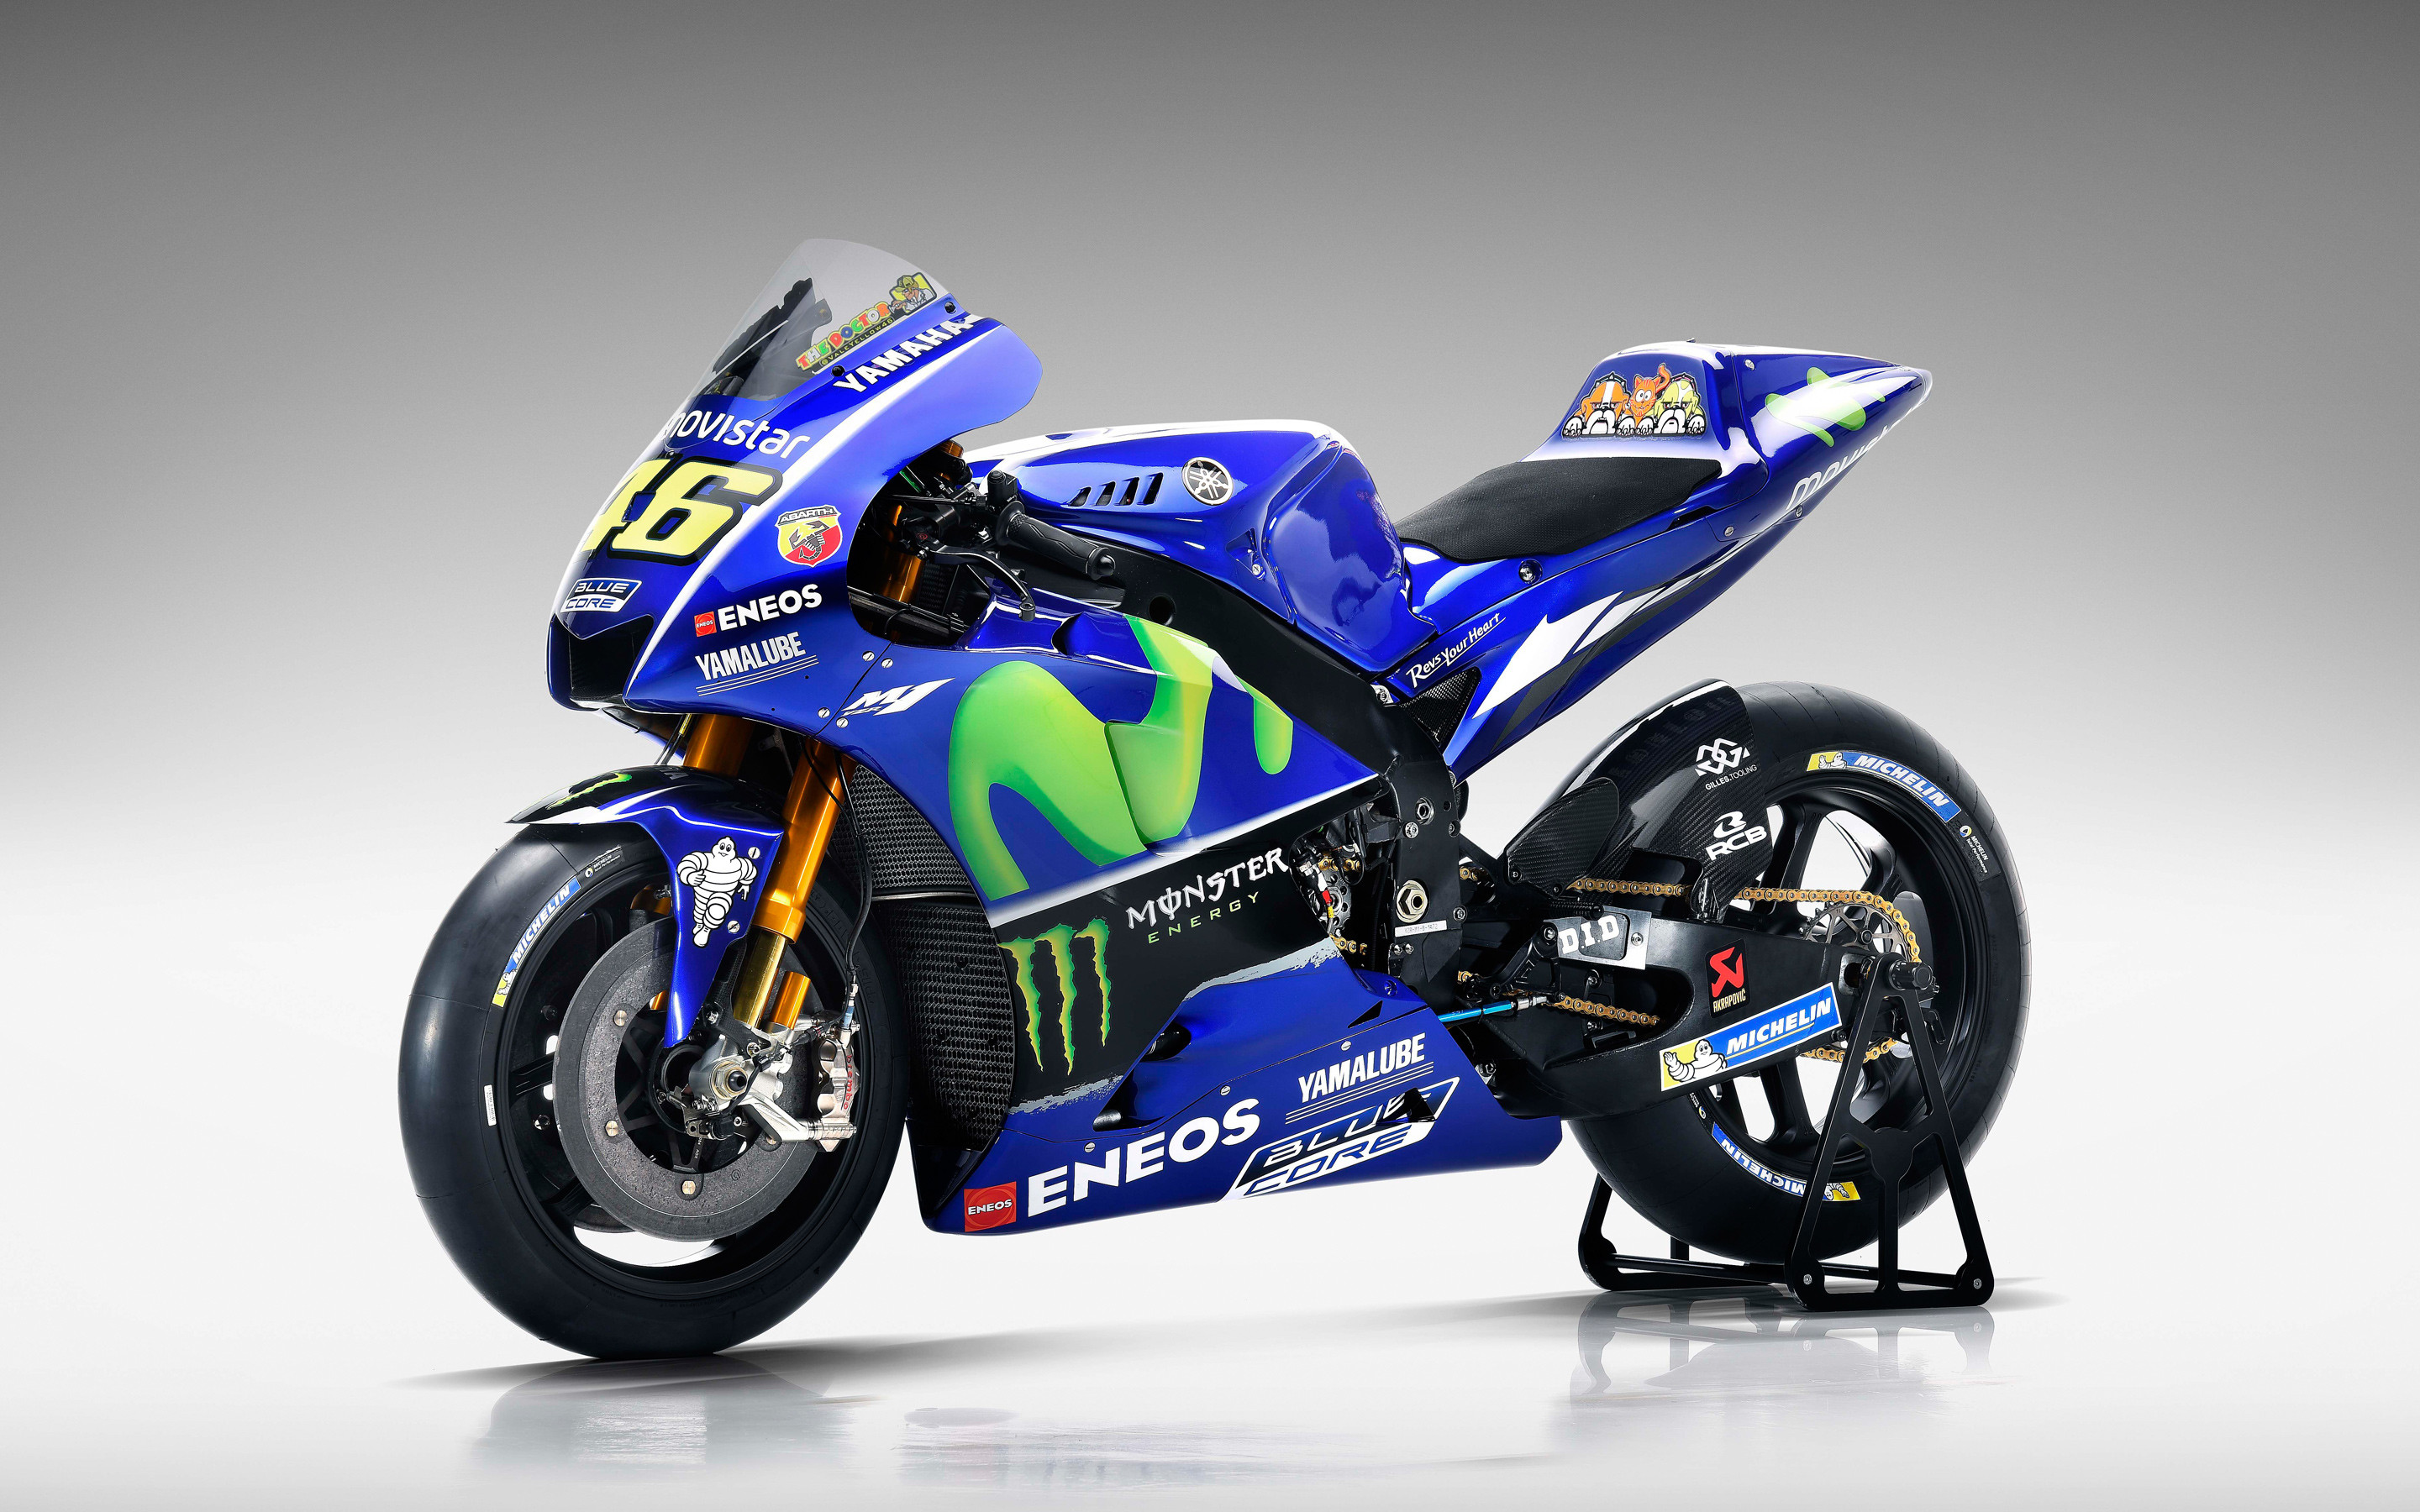 2880x1800 ... MotoGP Wallpapers for Android Free Download on MoboMarket | HD .